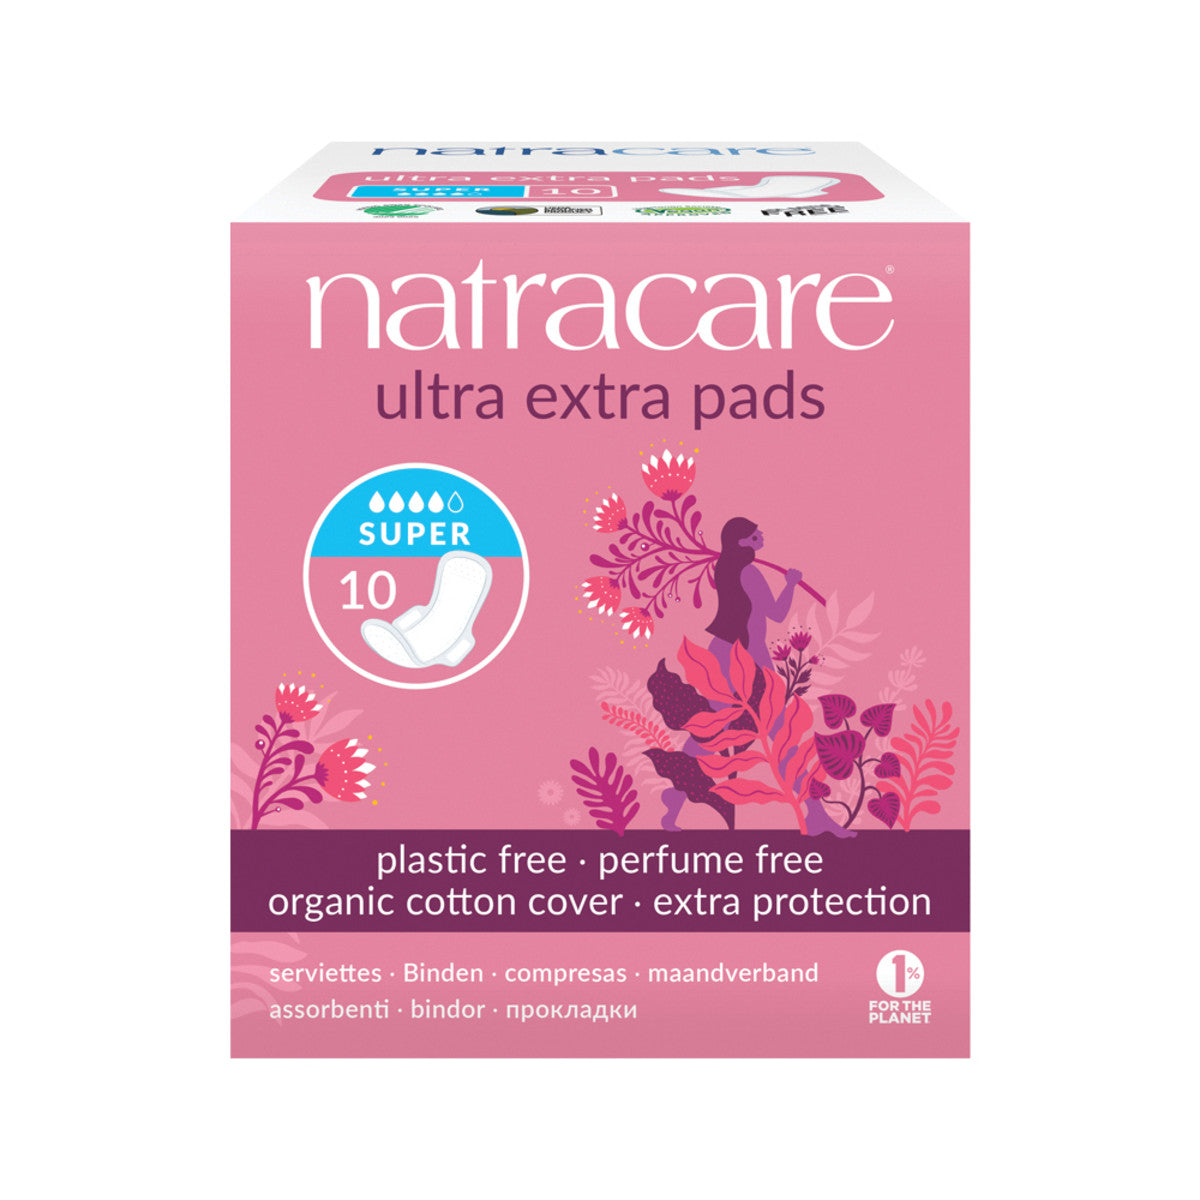 Natracare - Ultra Extra Pads Super with Organic Cotton Cover